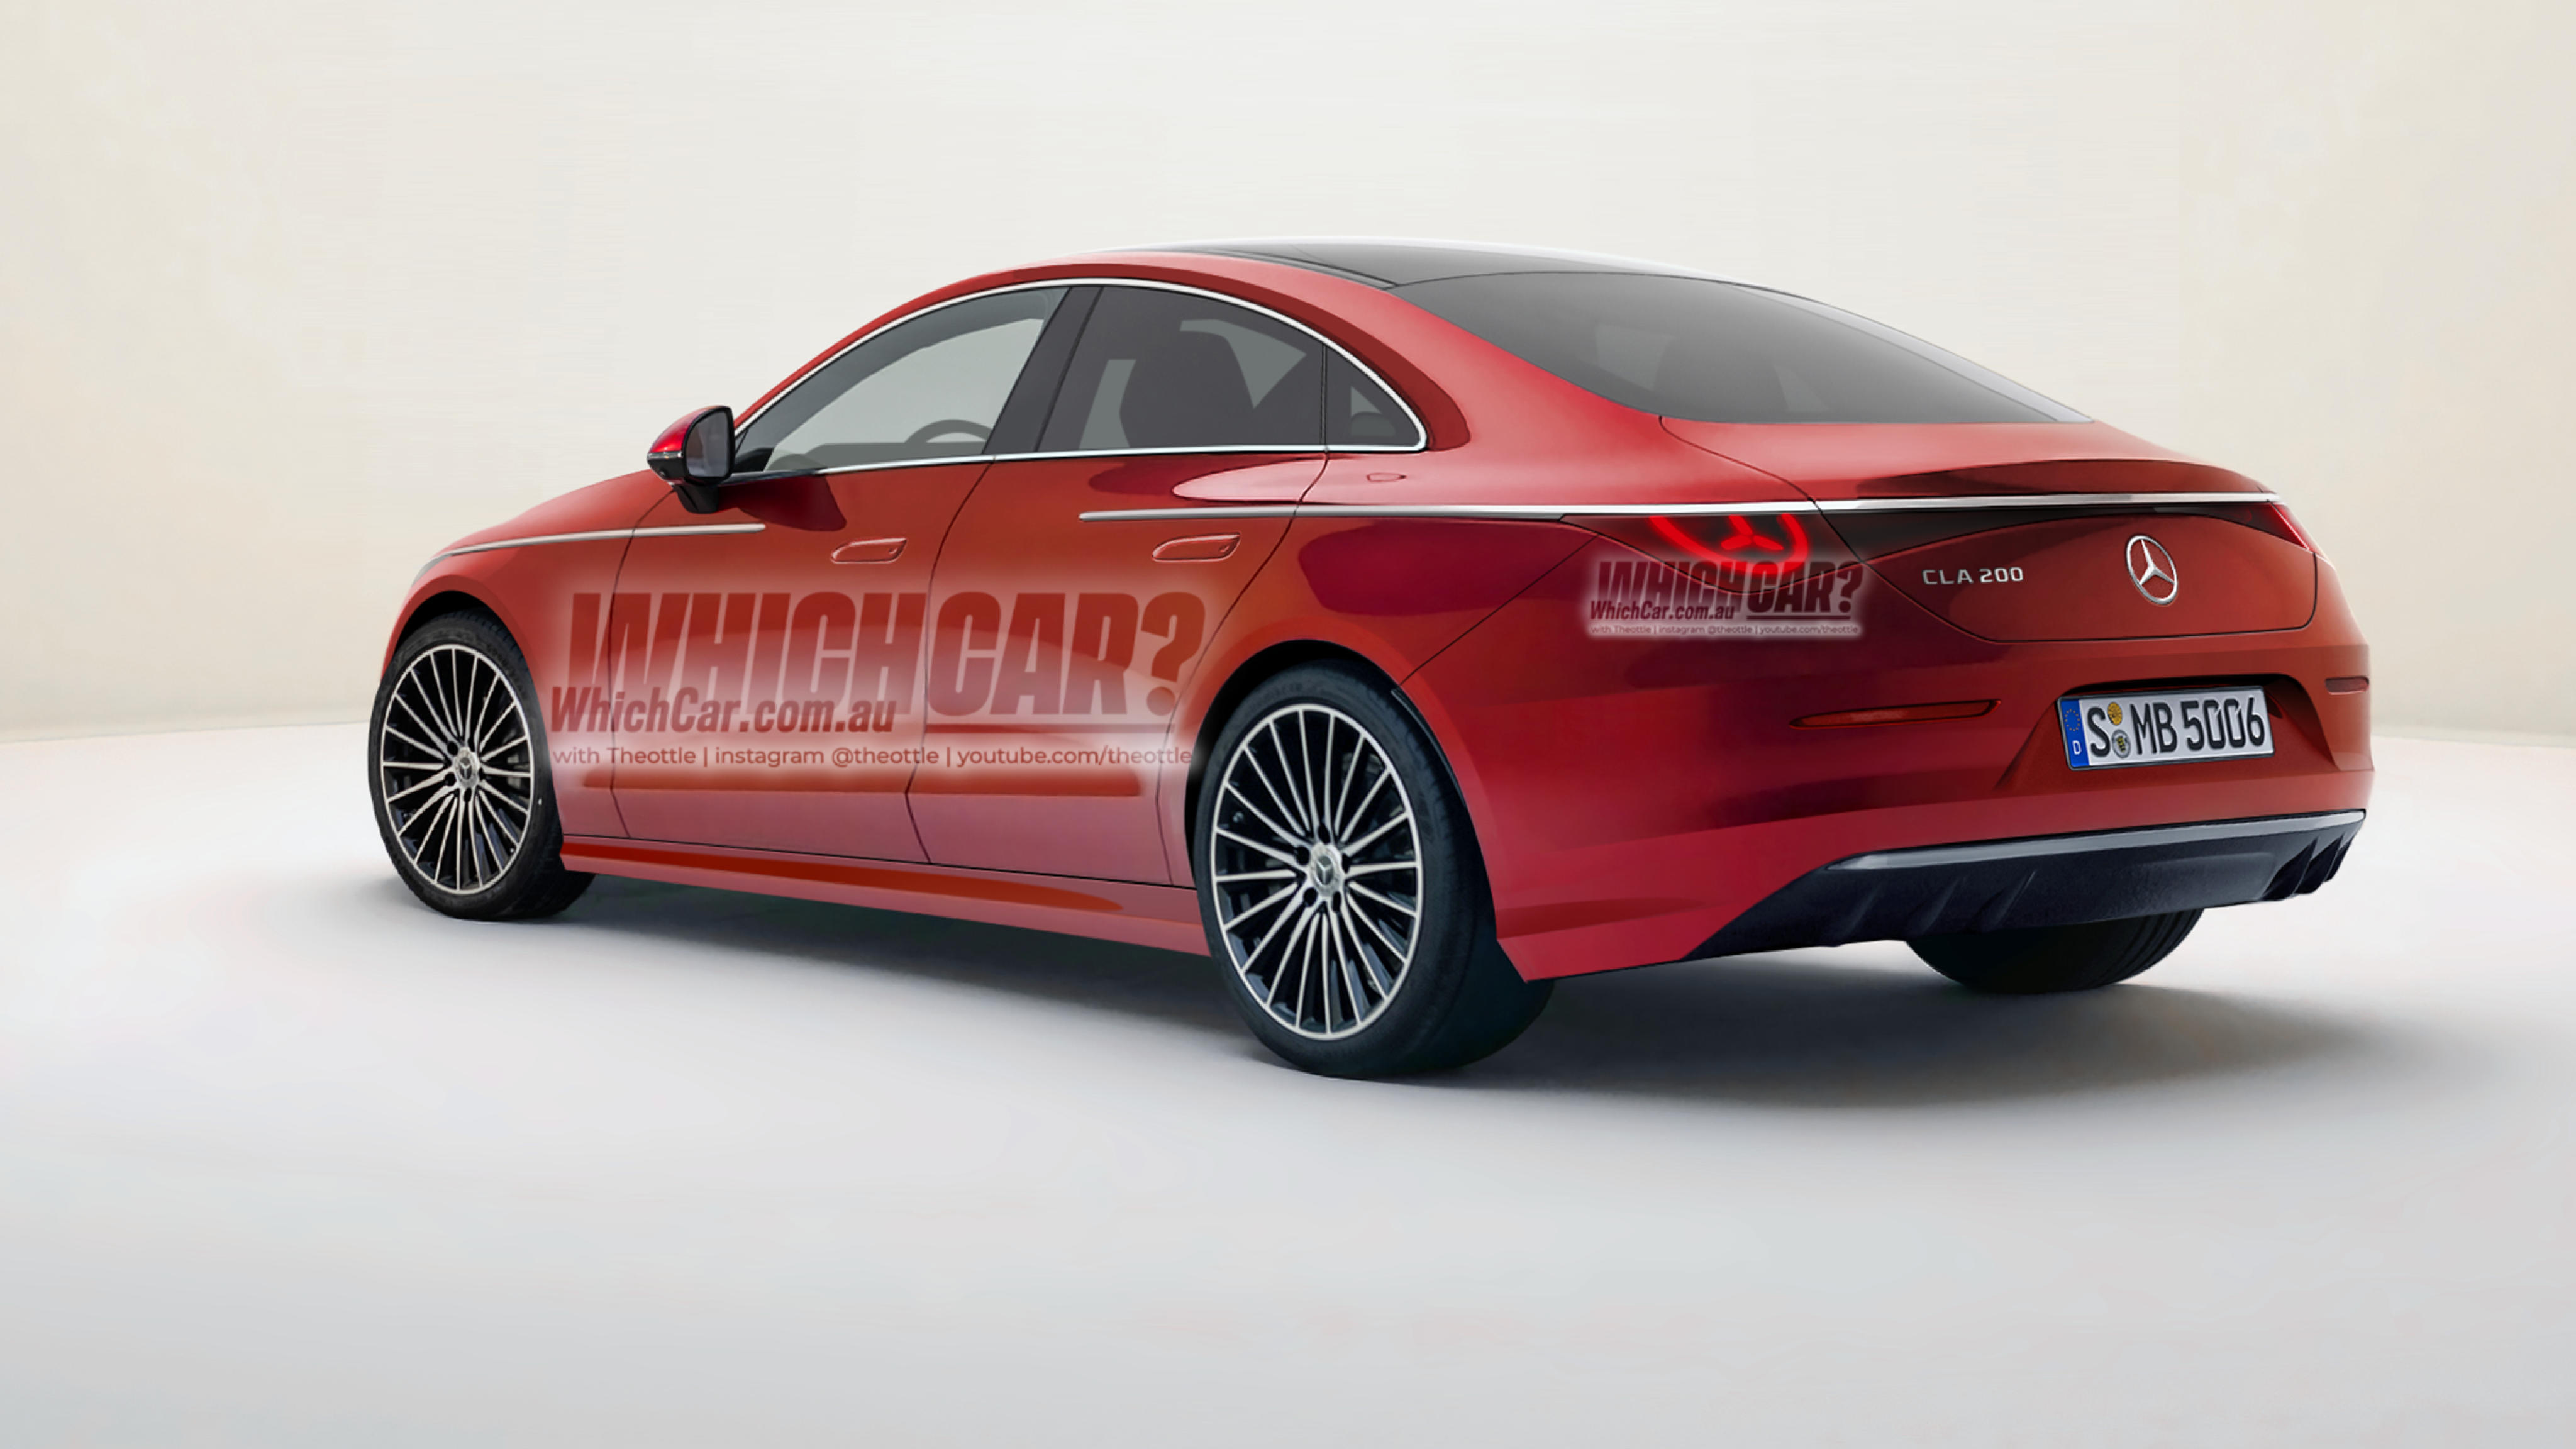 c6911f5c/2024 mercedes benz cla rendering whichcar australia theottle 02 png